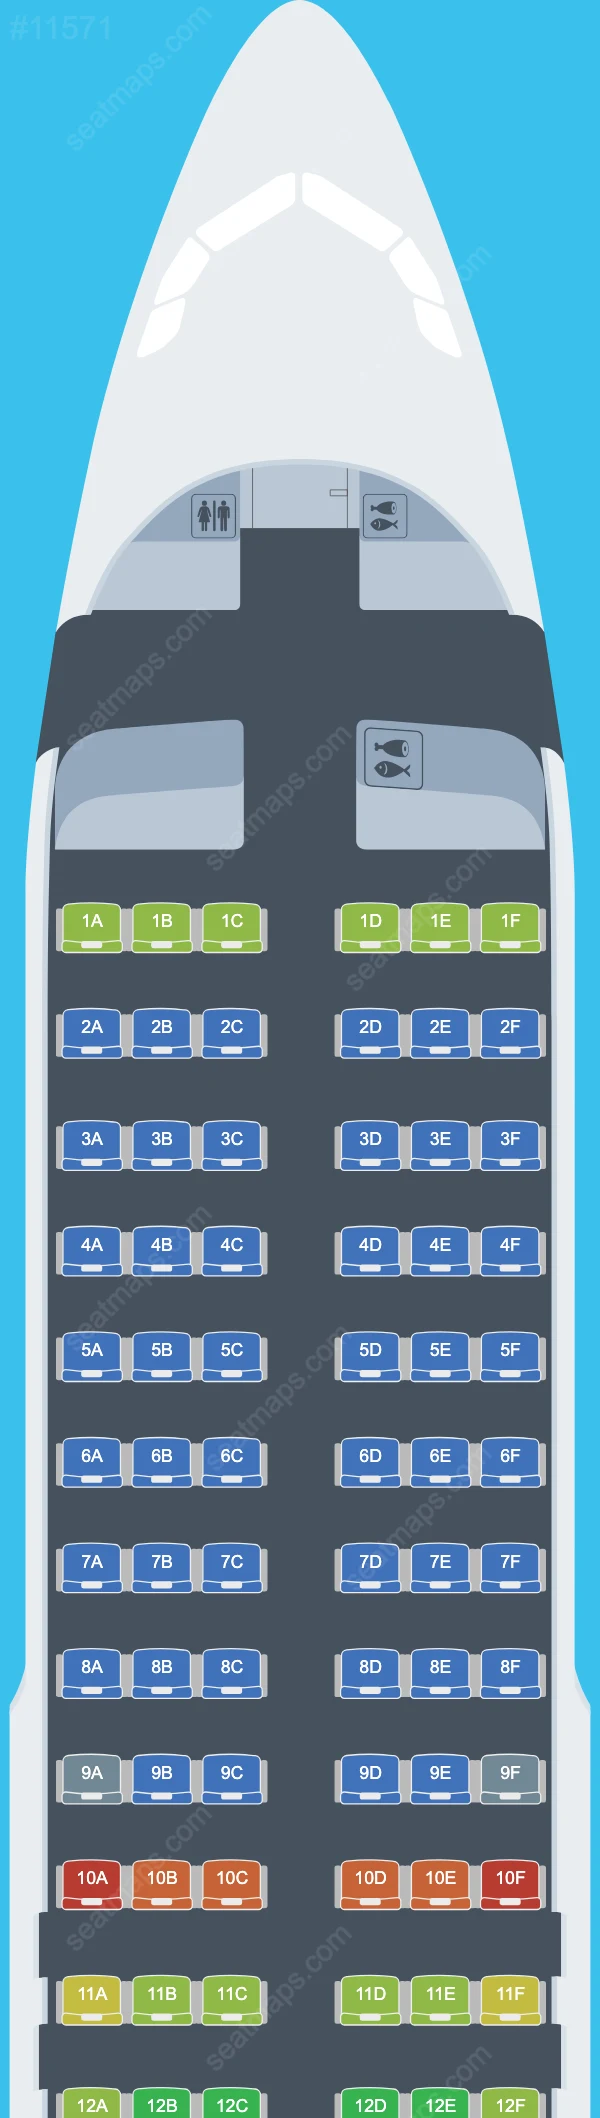 Brussels Airlines Airbus A320 Seat Maps A320-200neo V.1